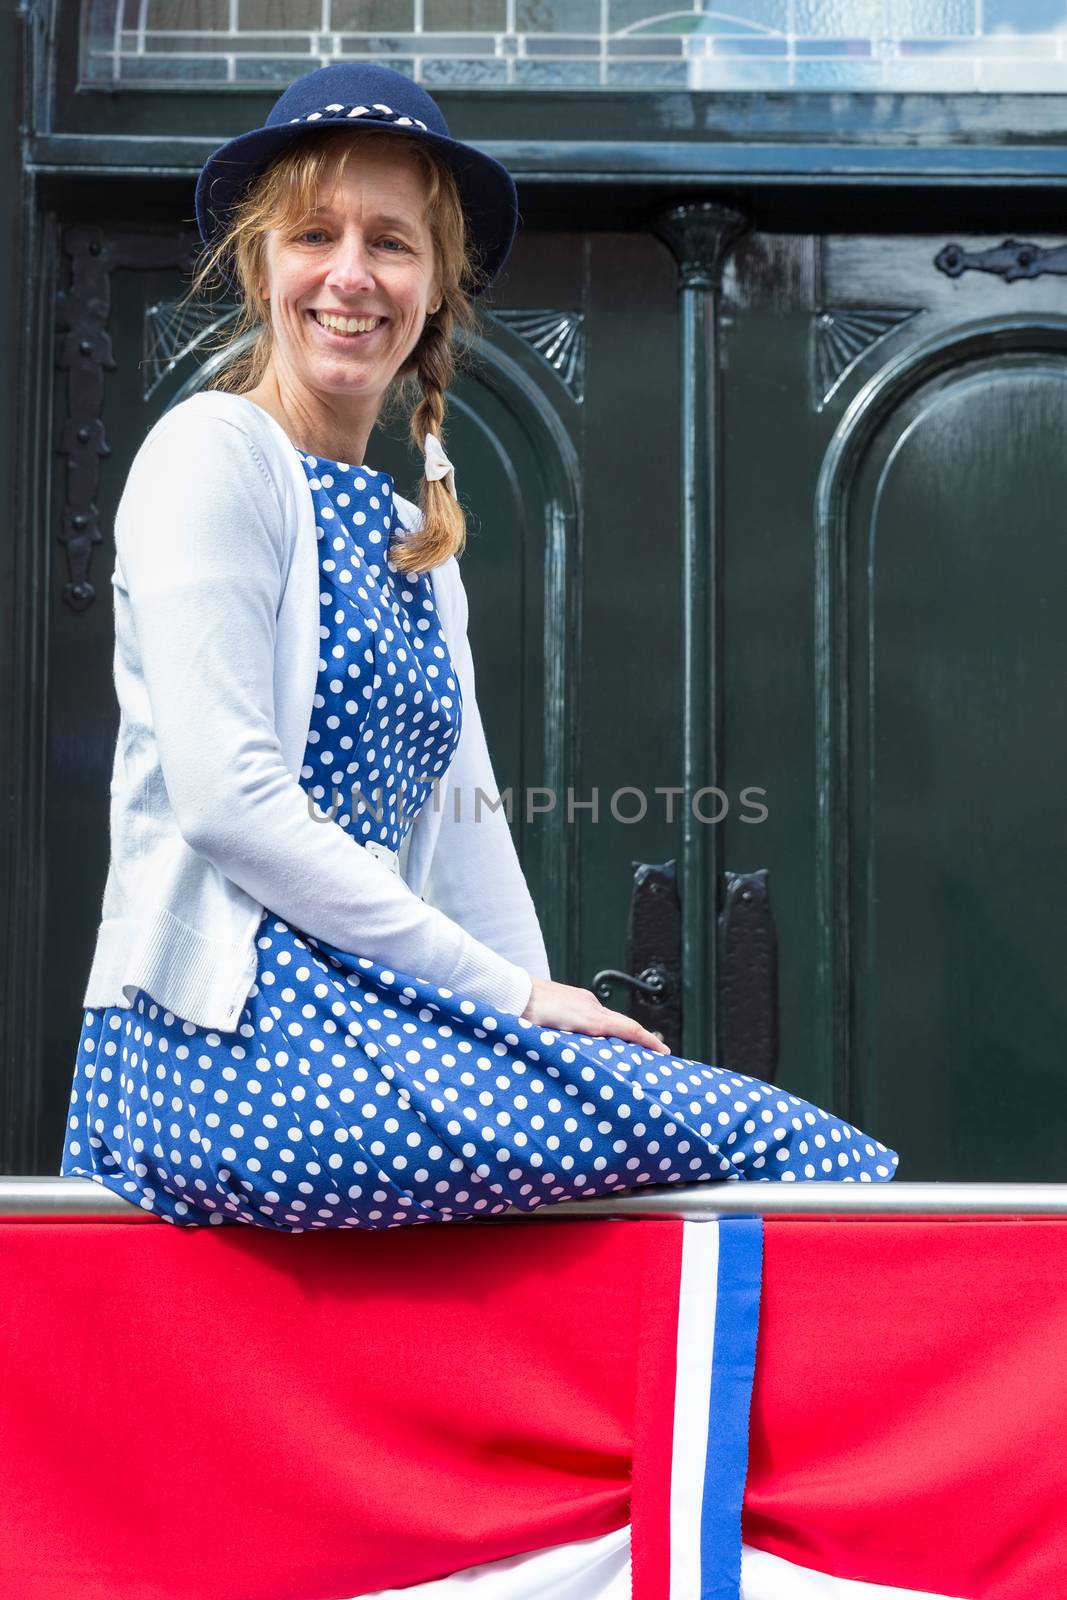 European woman in old-fashioned clothes with dutch flag by BenSchonewille